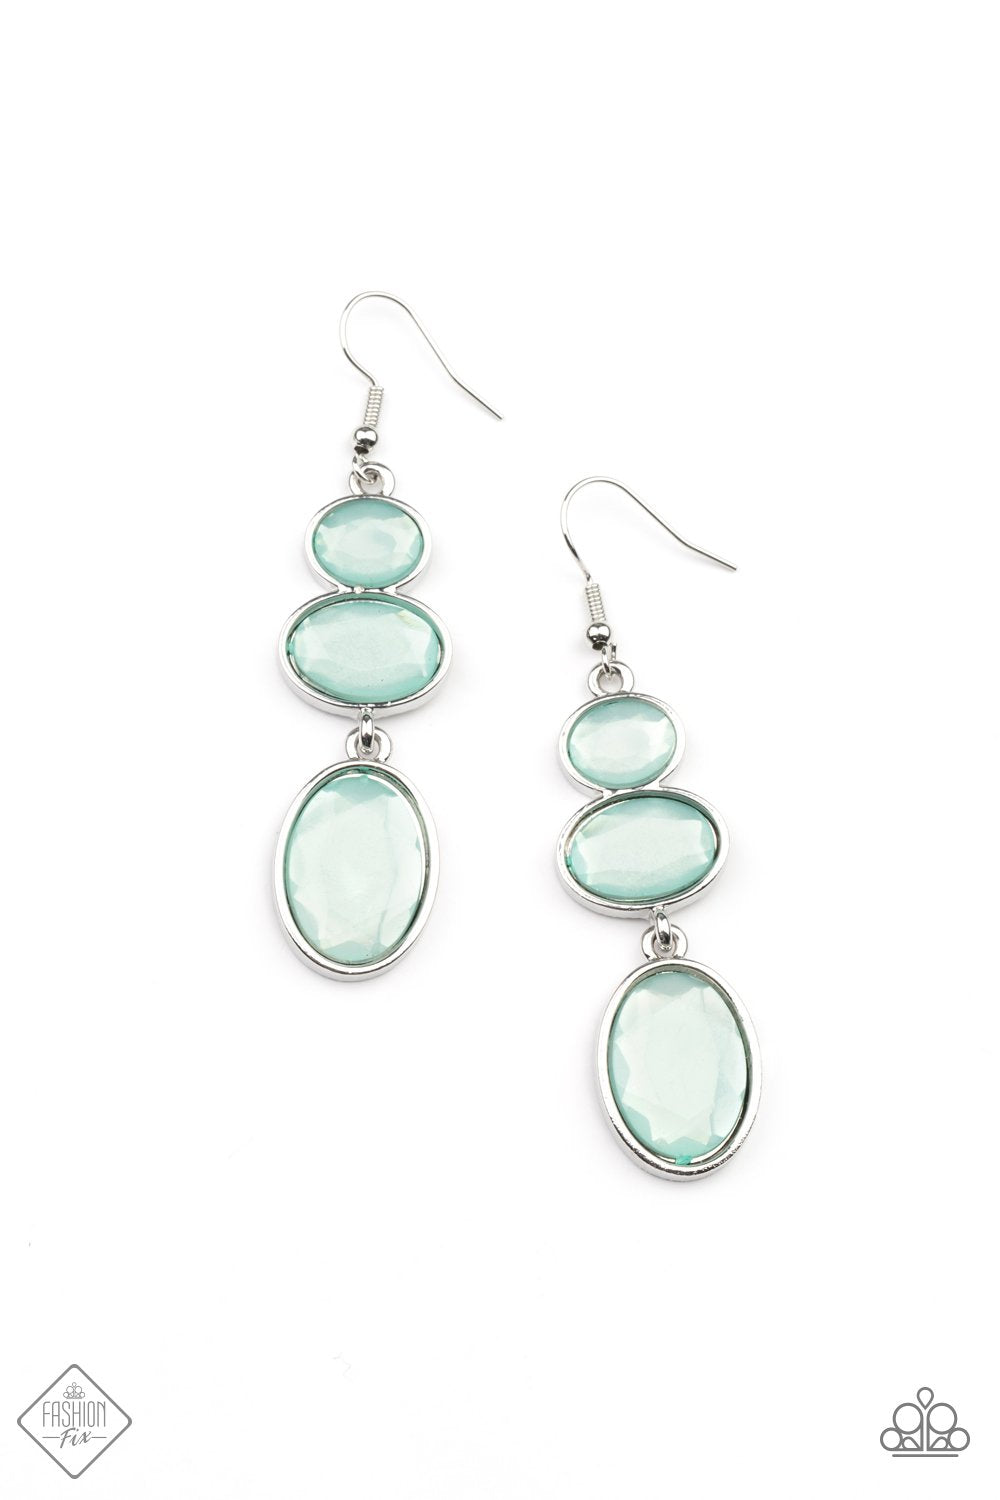 Paparazzi&nbsp;Tiers Of Tranquility Blue Fishhook Earrings&nbsp;- Fashion Fix Glimpses of Malibu May 2021